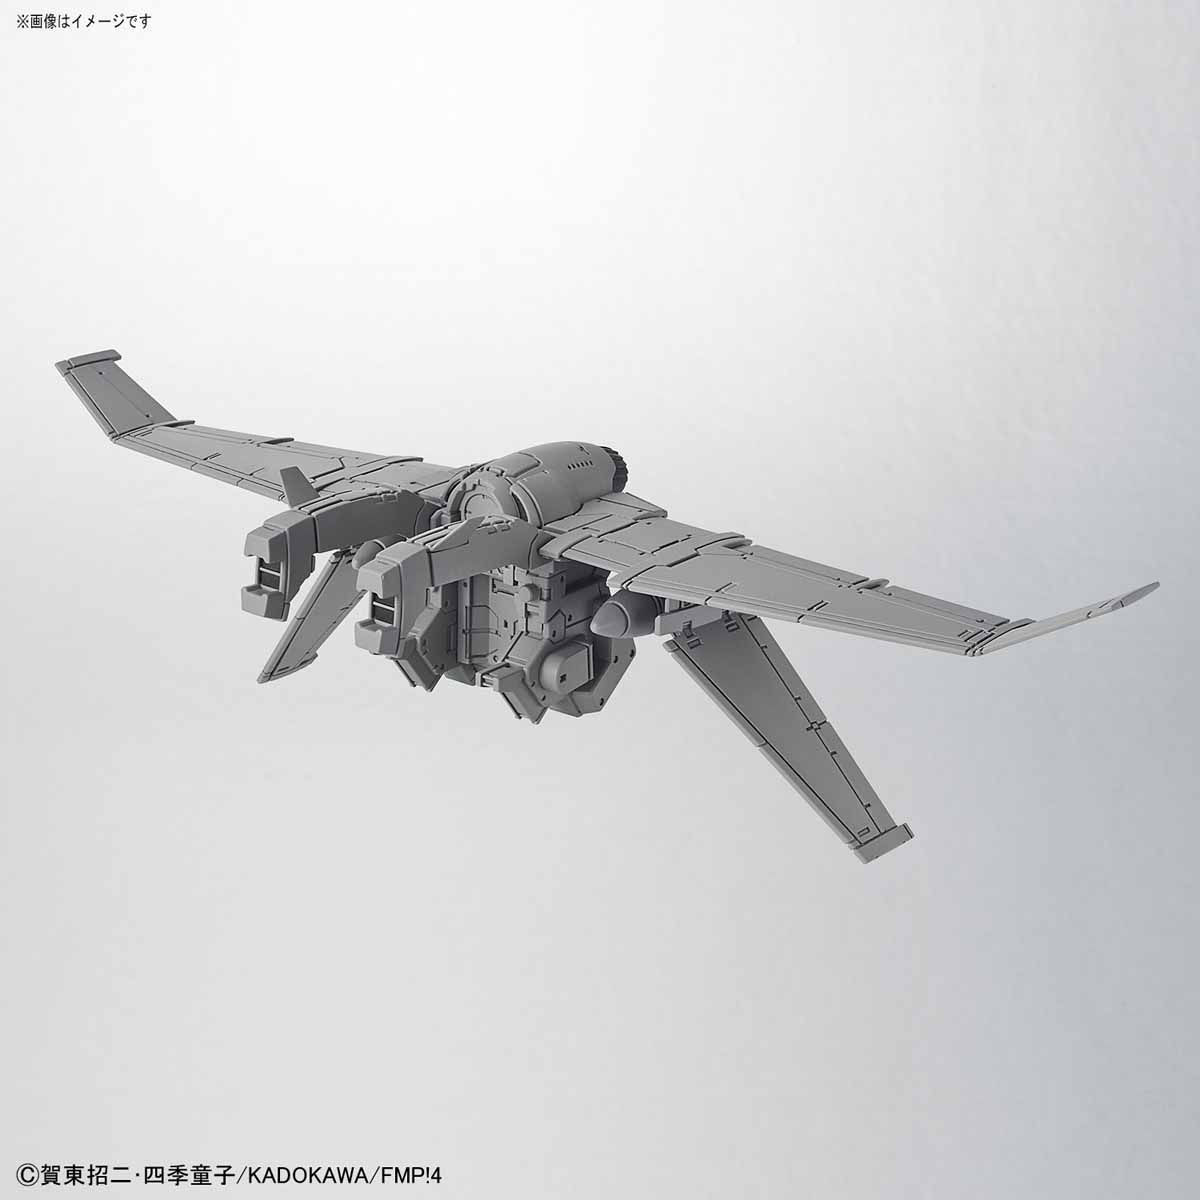 HG 1/60 ARX-7+XL-2 Arbalest Ver.IV with XL-2 Booster - Full Metal Panic